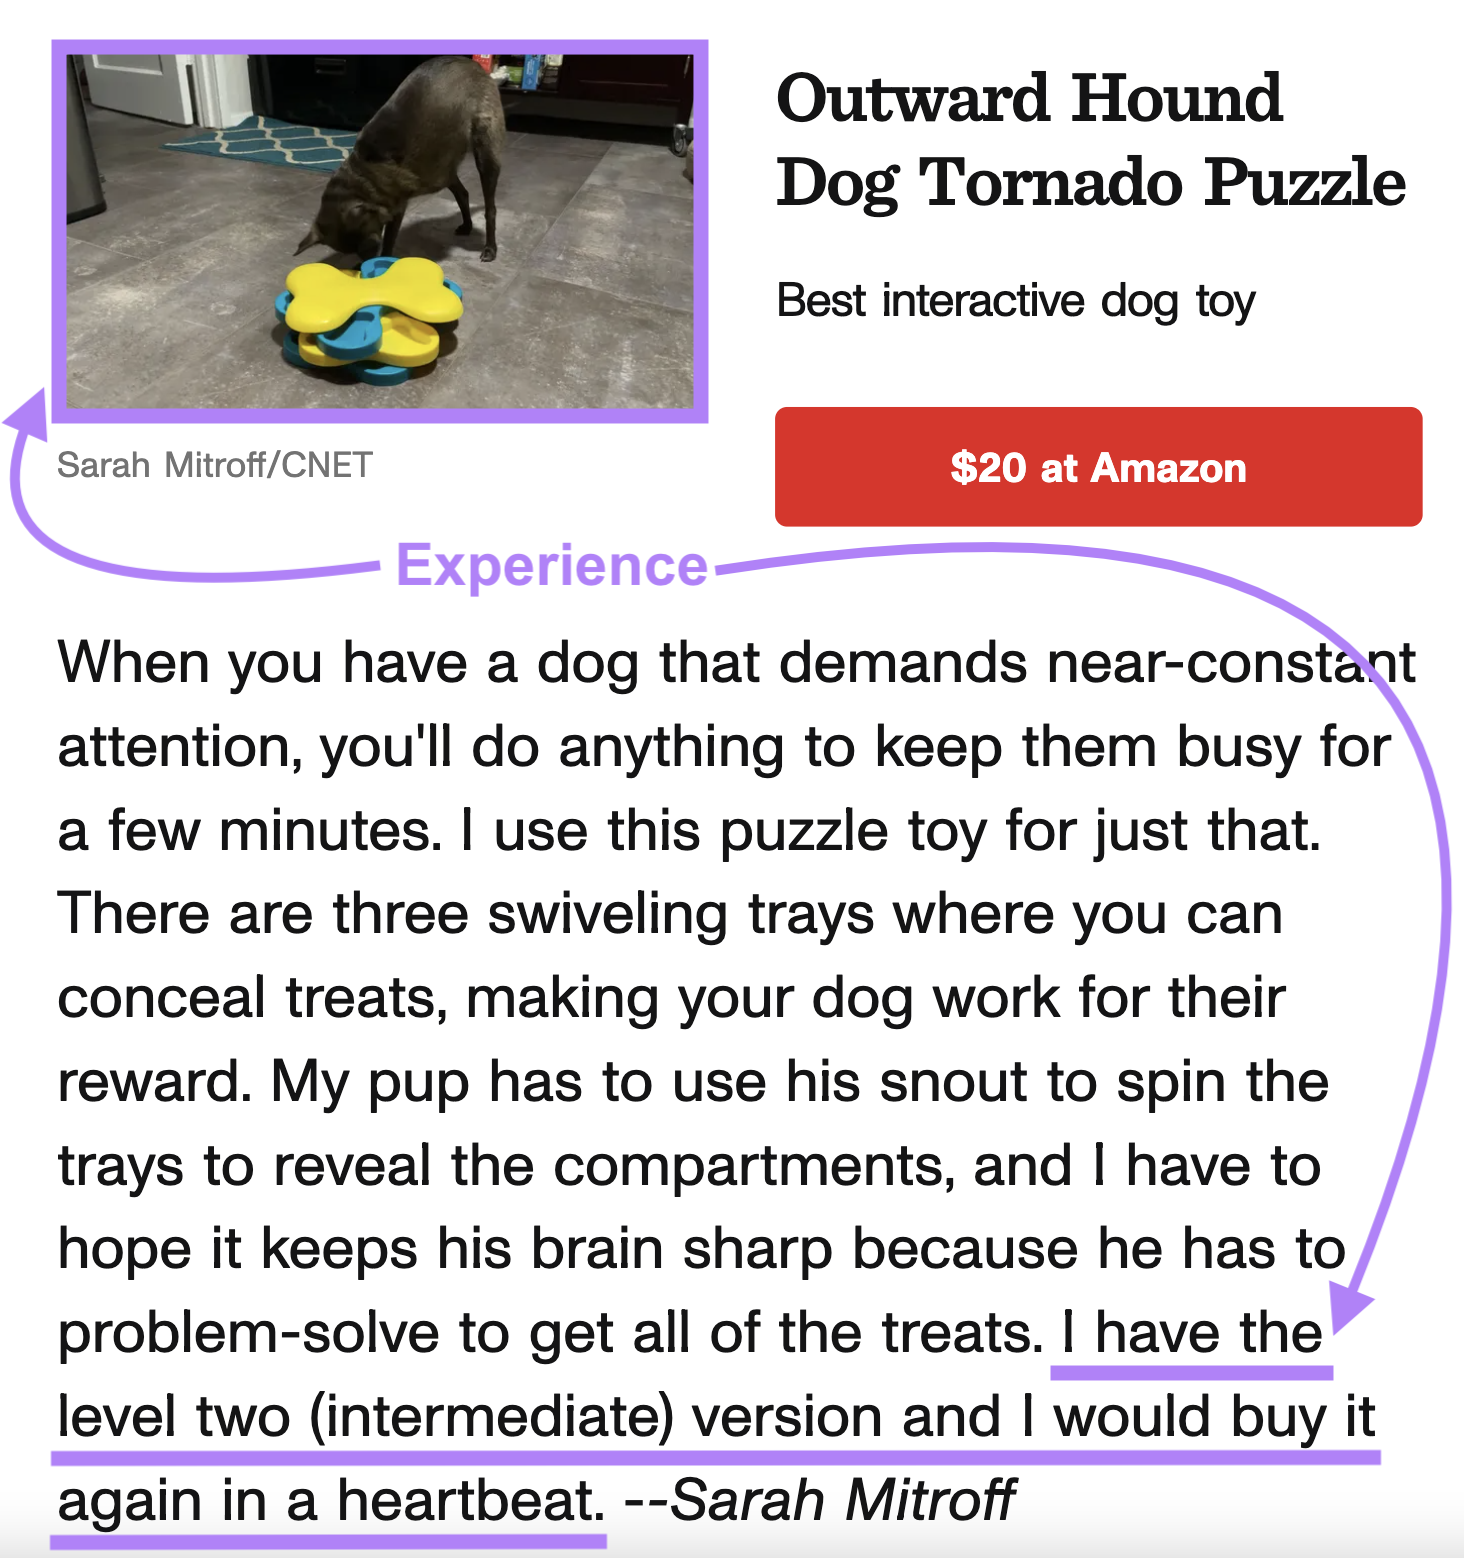 an example of dog article by CNET highlighting experience